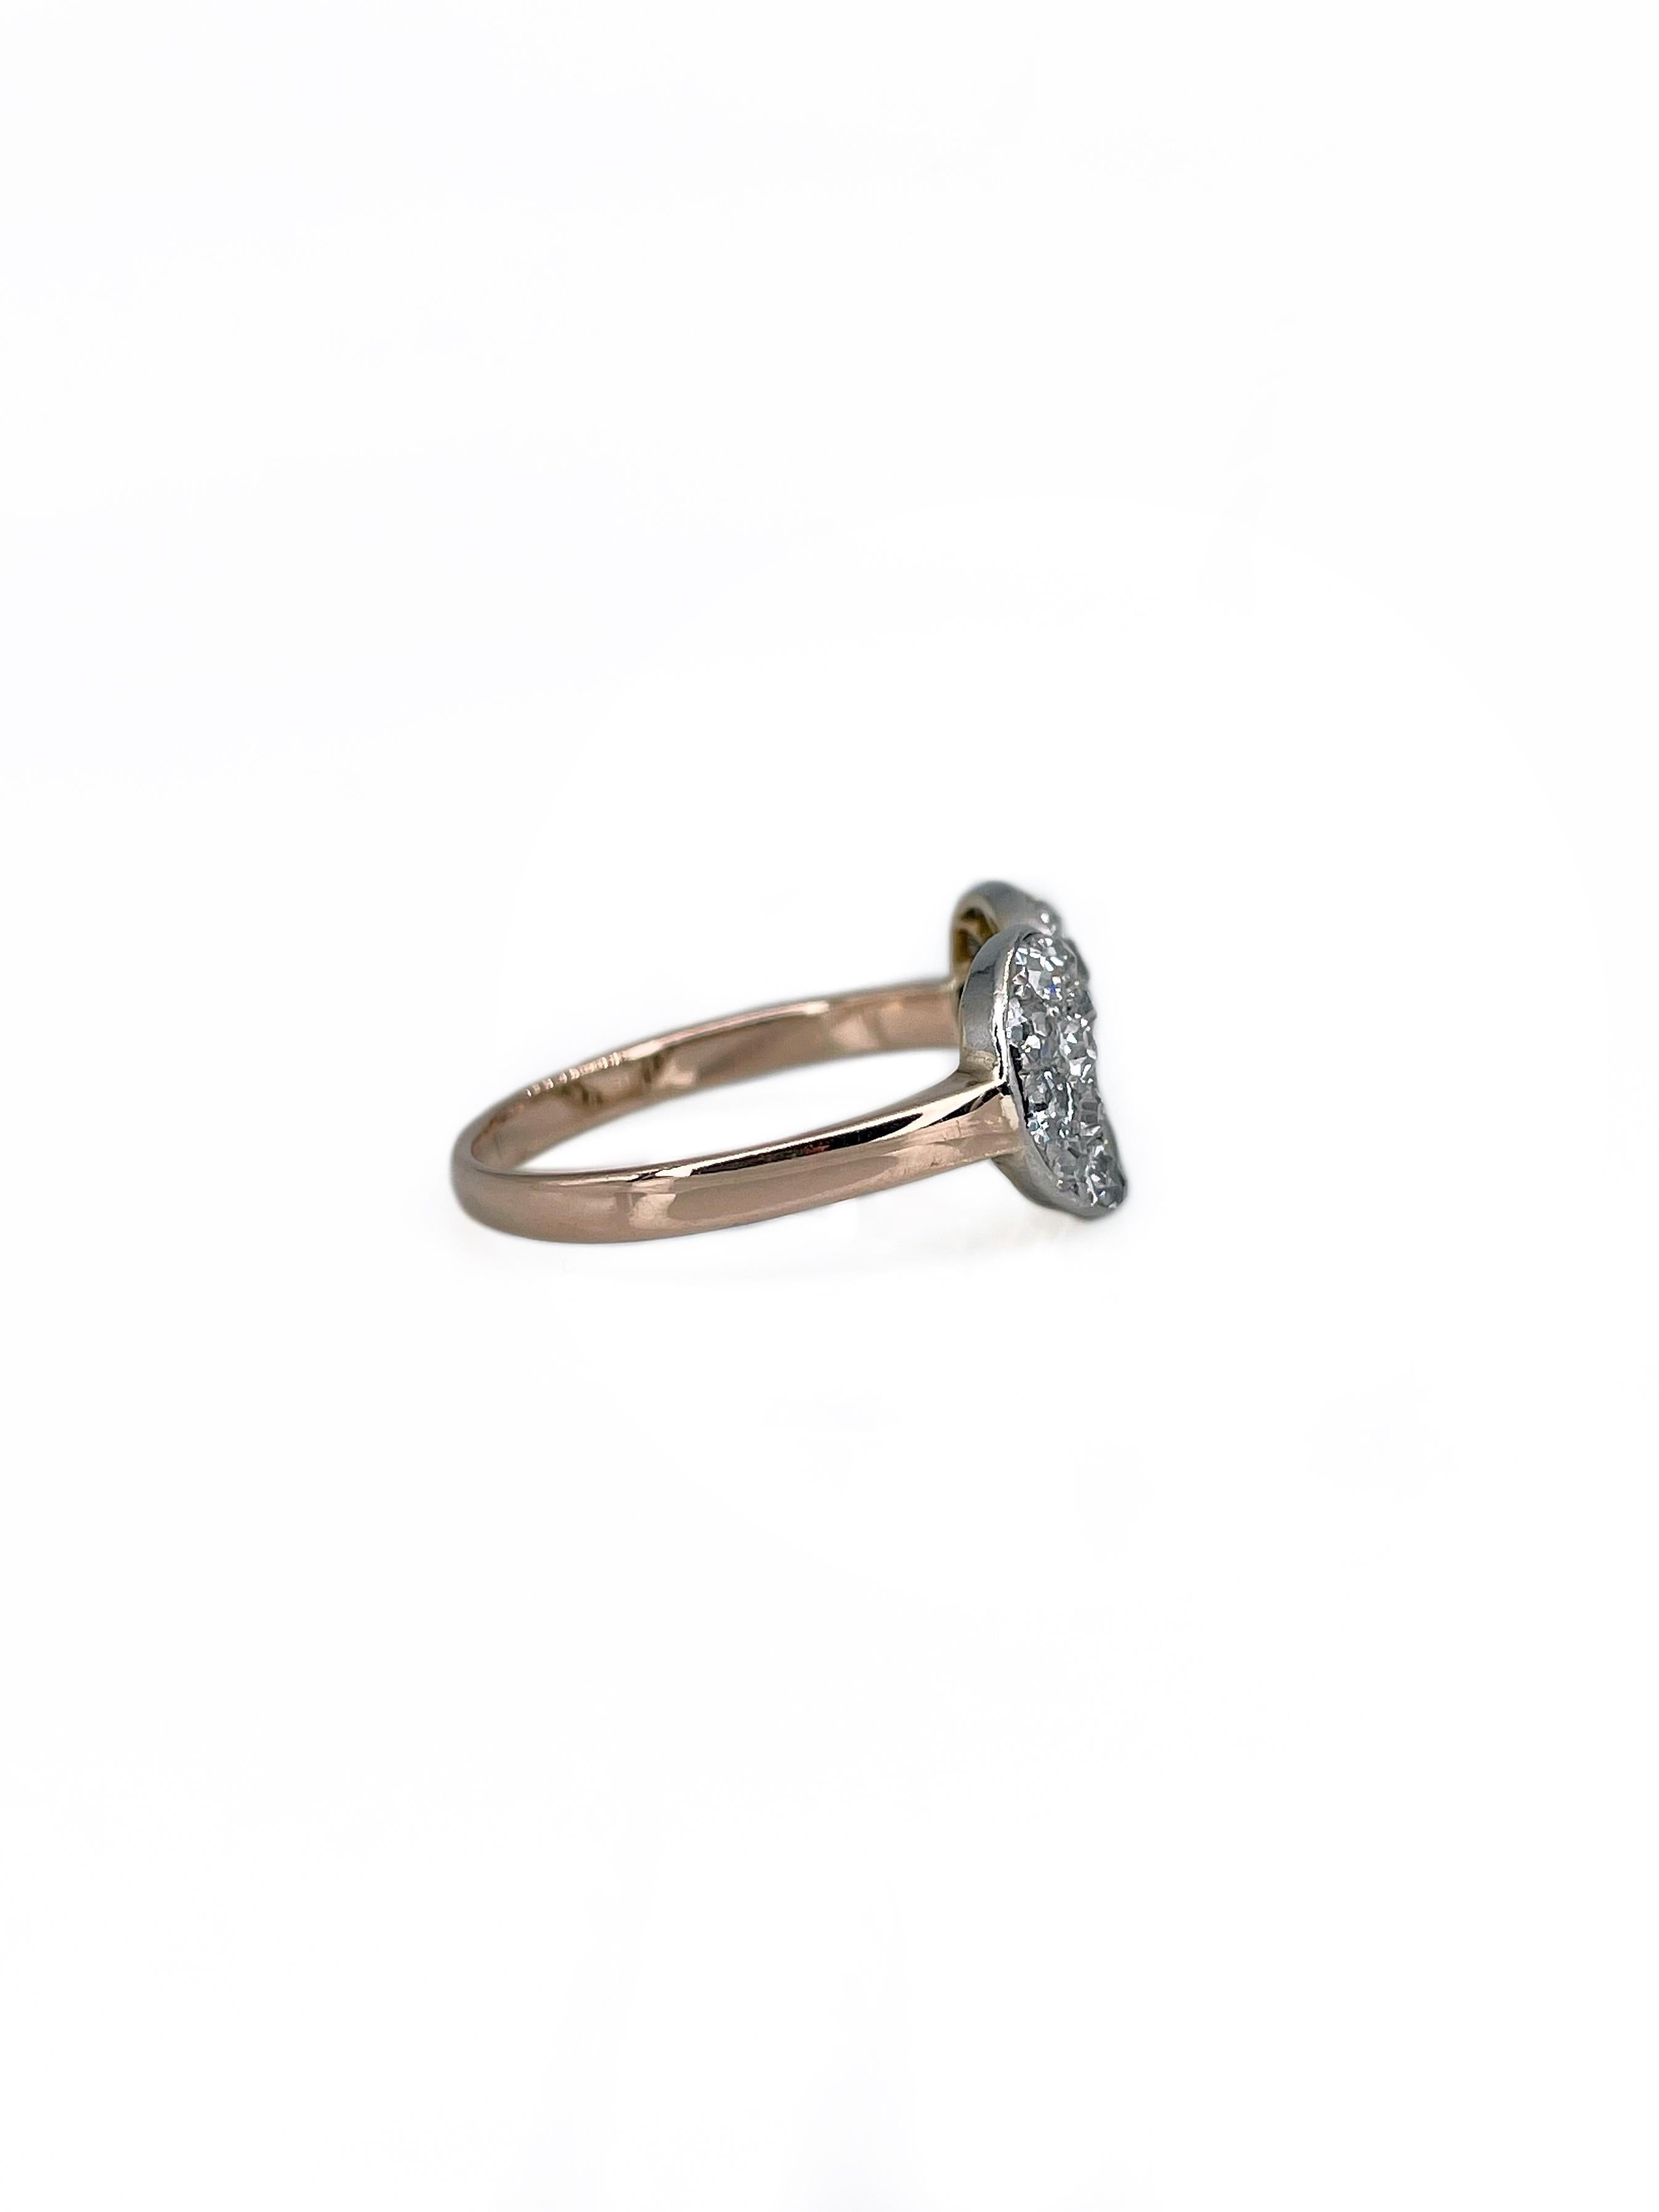 Victorian 18 Karat Gold Old Cut Diamond Heart Shape Engagement Ring In Good Condition For Sale In Vilnius, LT